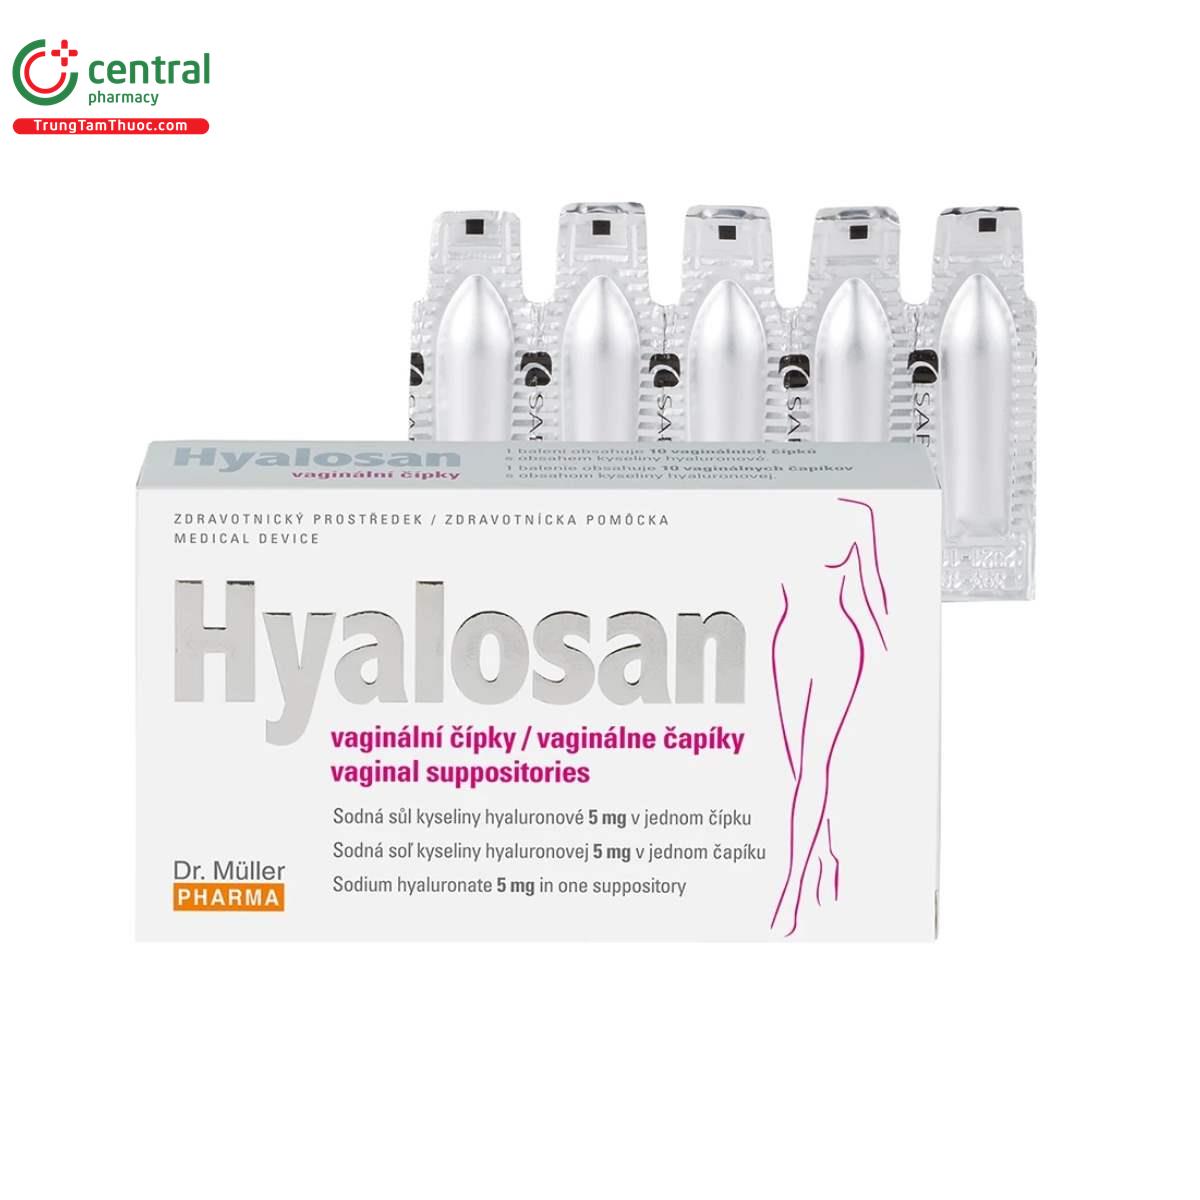 hyalosan vaginal supporities 1 T8456